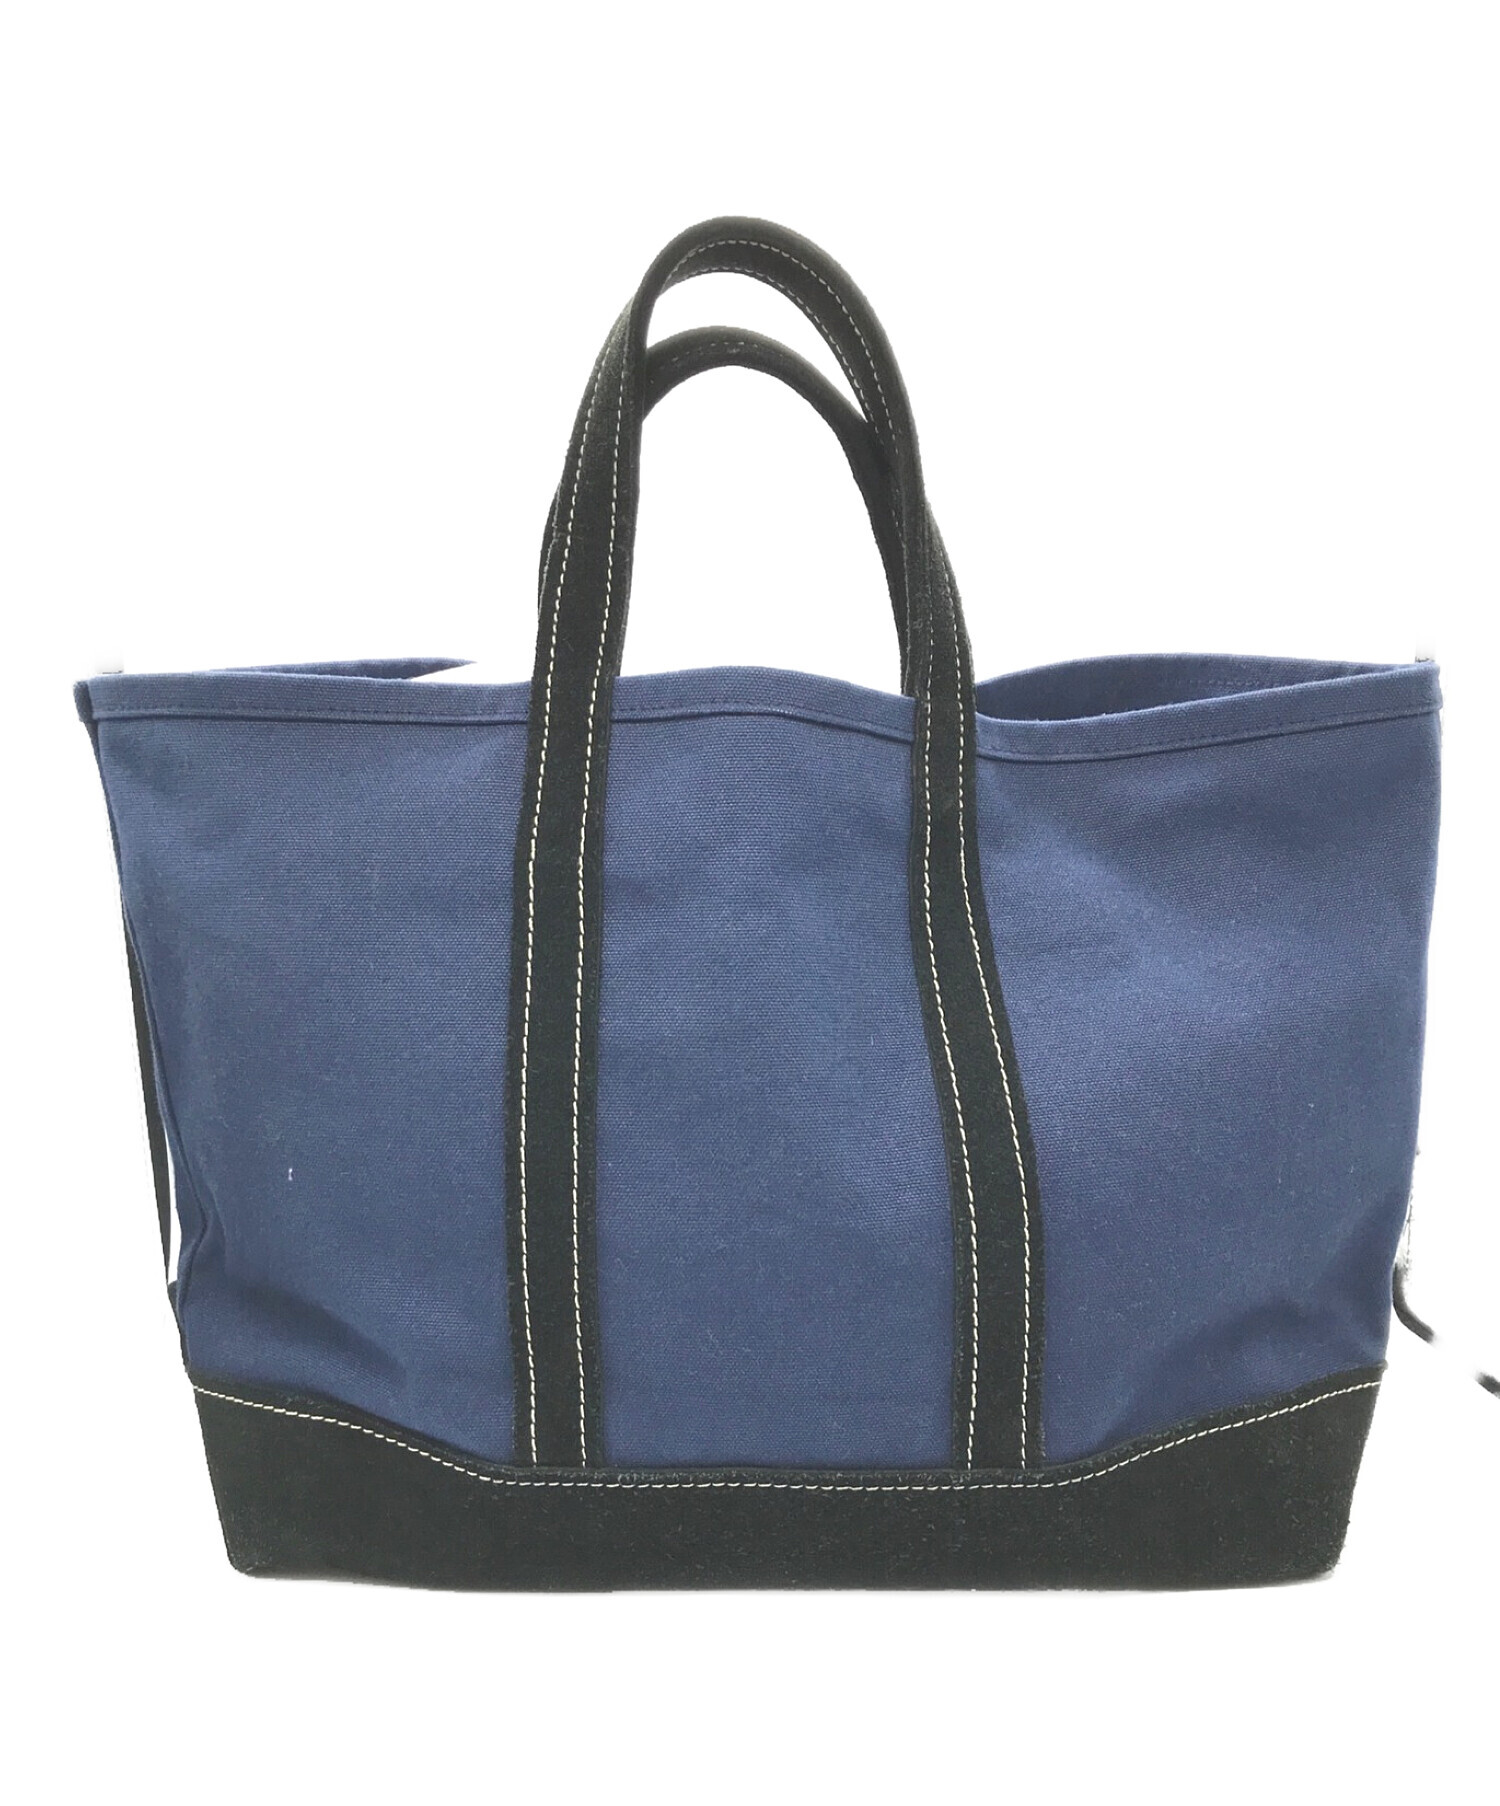 STANLEY ＆ SONS (スタンレー＆サンズ) CANVAS SUEDE TOTE /キャンバススウェードトートバッグ ネイビー